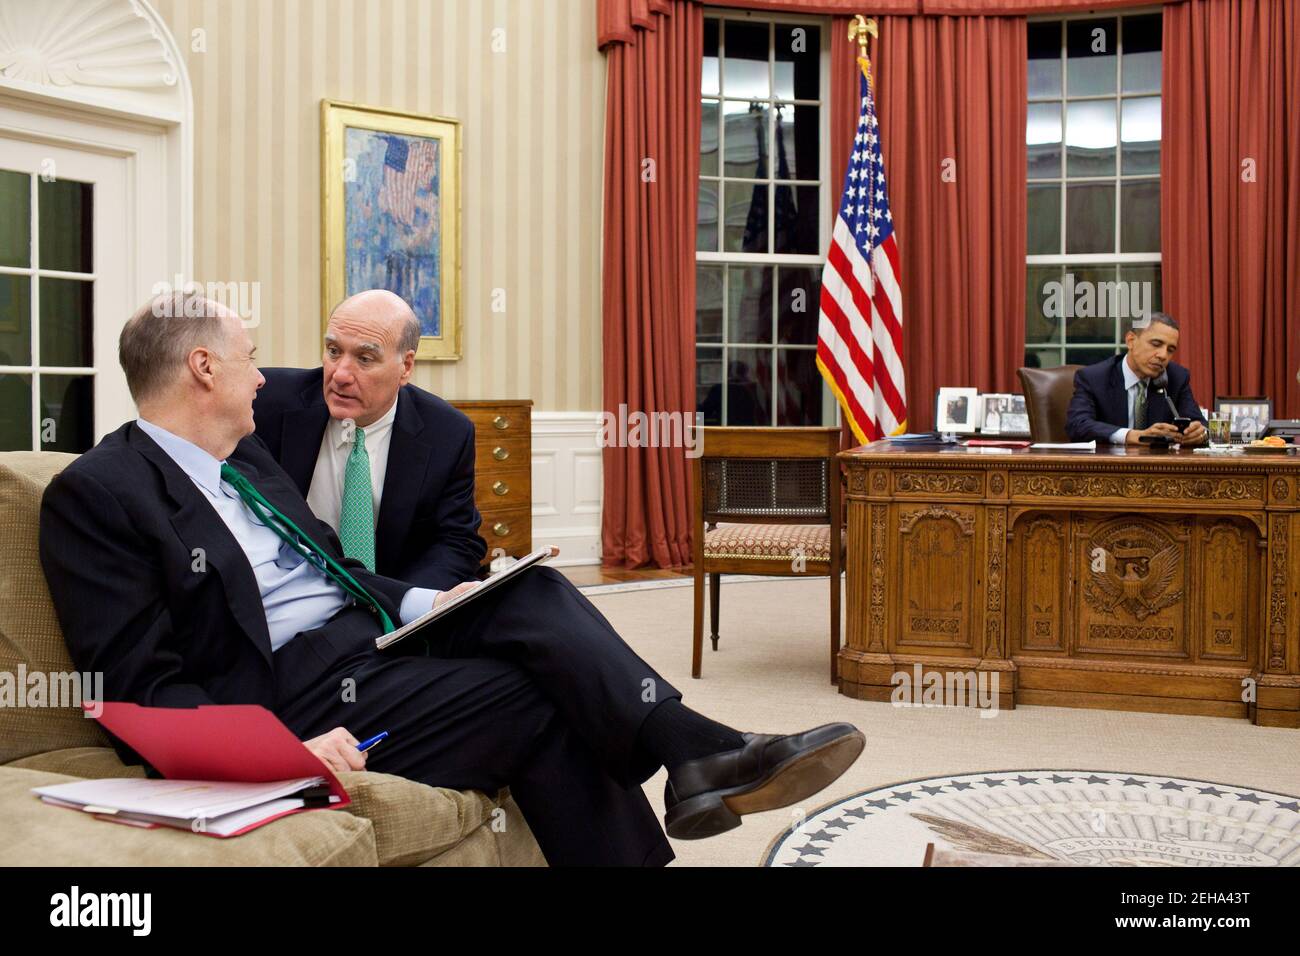 Chief of Staff Bill Daley confers with National Security Advisor Tom Donilon, left, as President Barack Obama talks on the phone in the Oval Office, March 17, 2011. Stock Photo